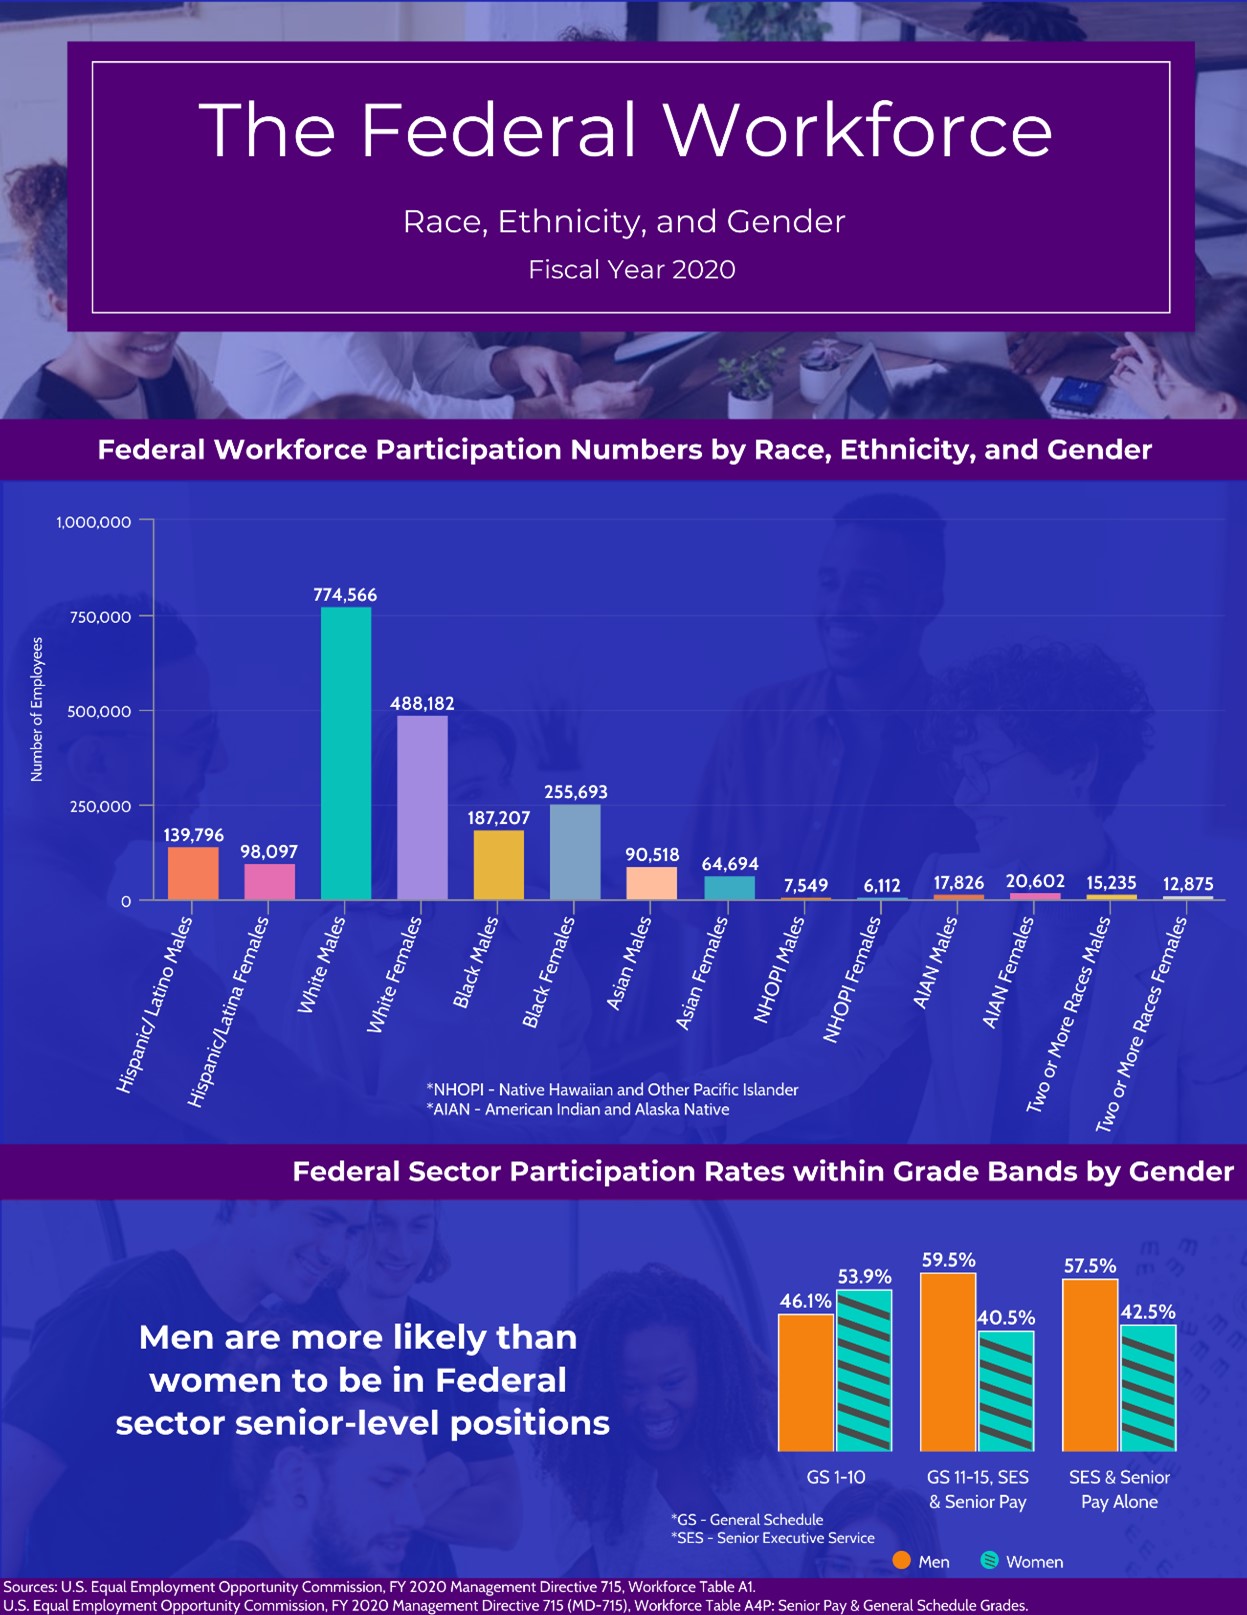 Infographic: The Federal Workforce: Race, Ethnicity, and Gender, Fiscal Year 2020. Link goes to text data.